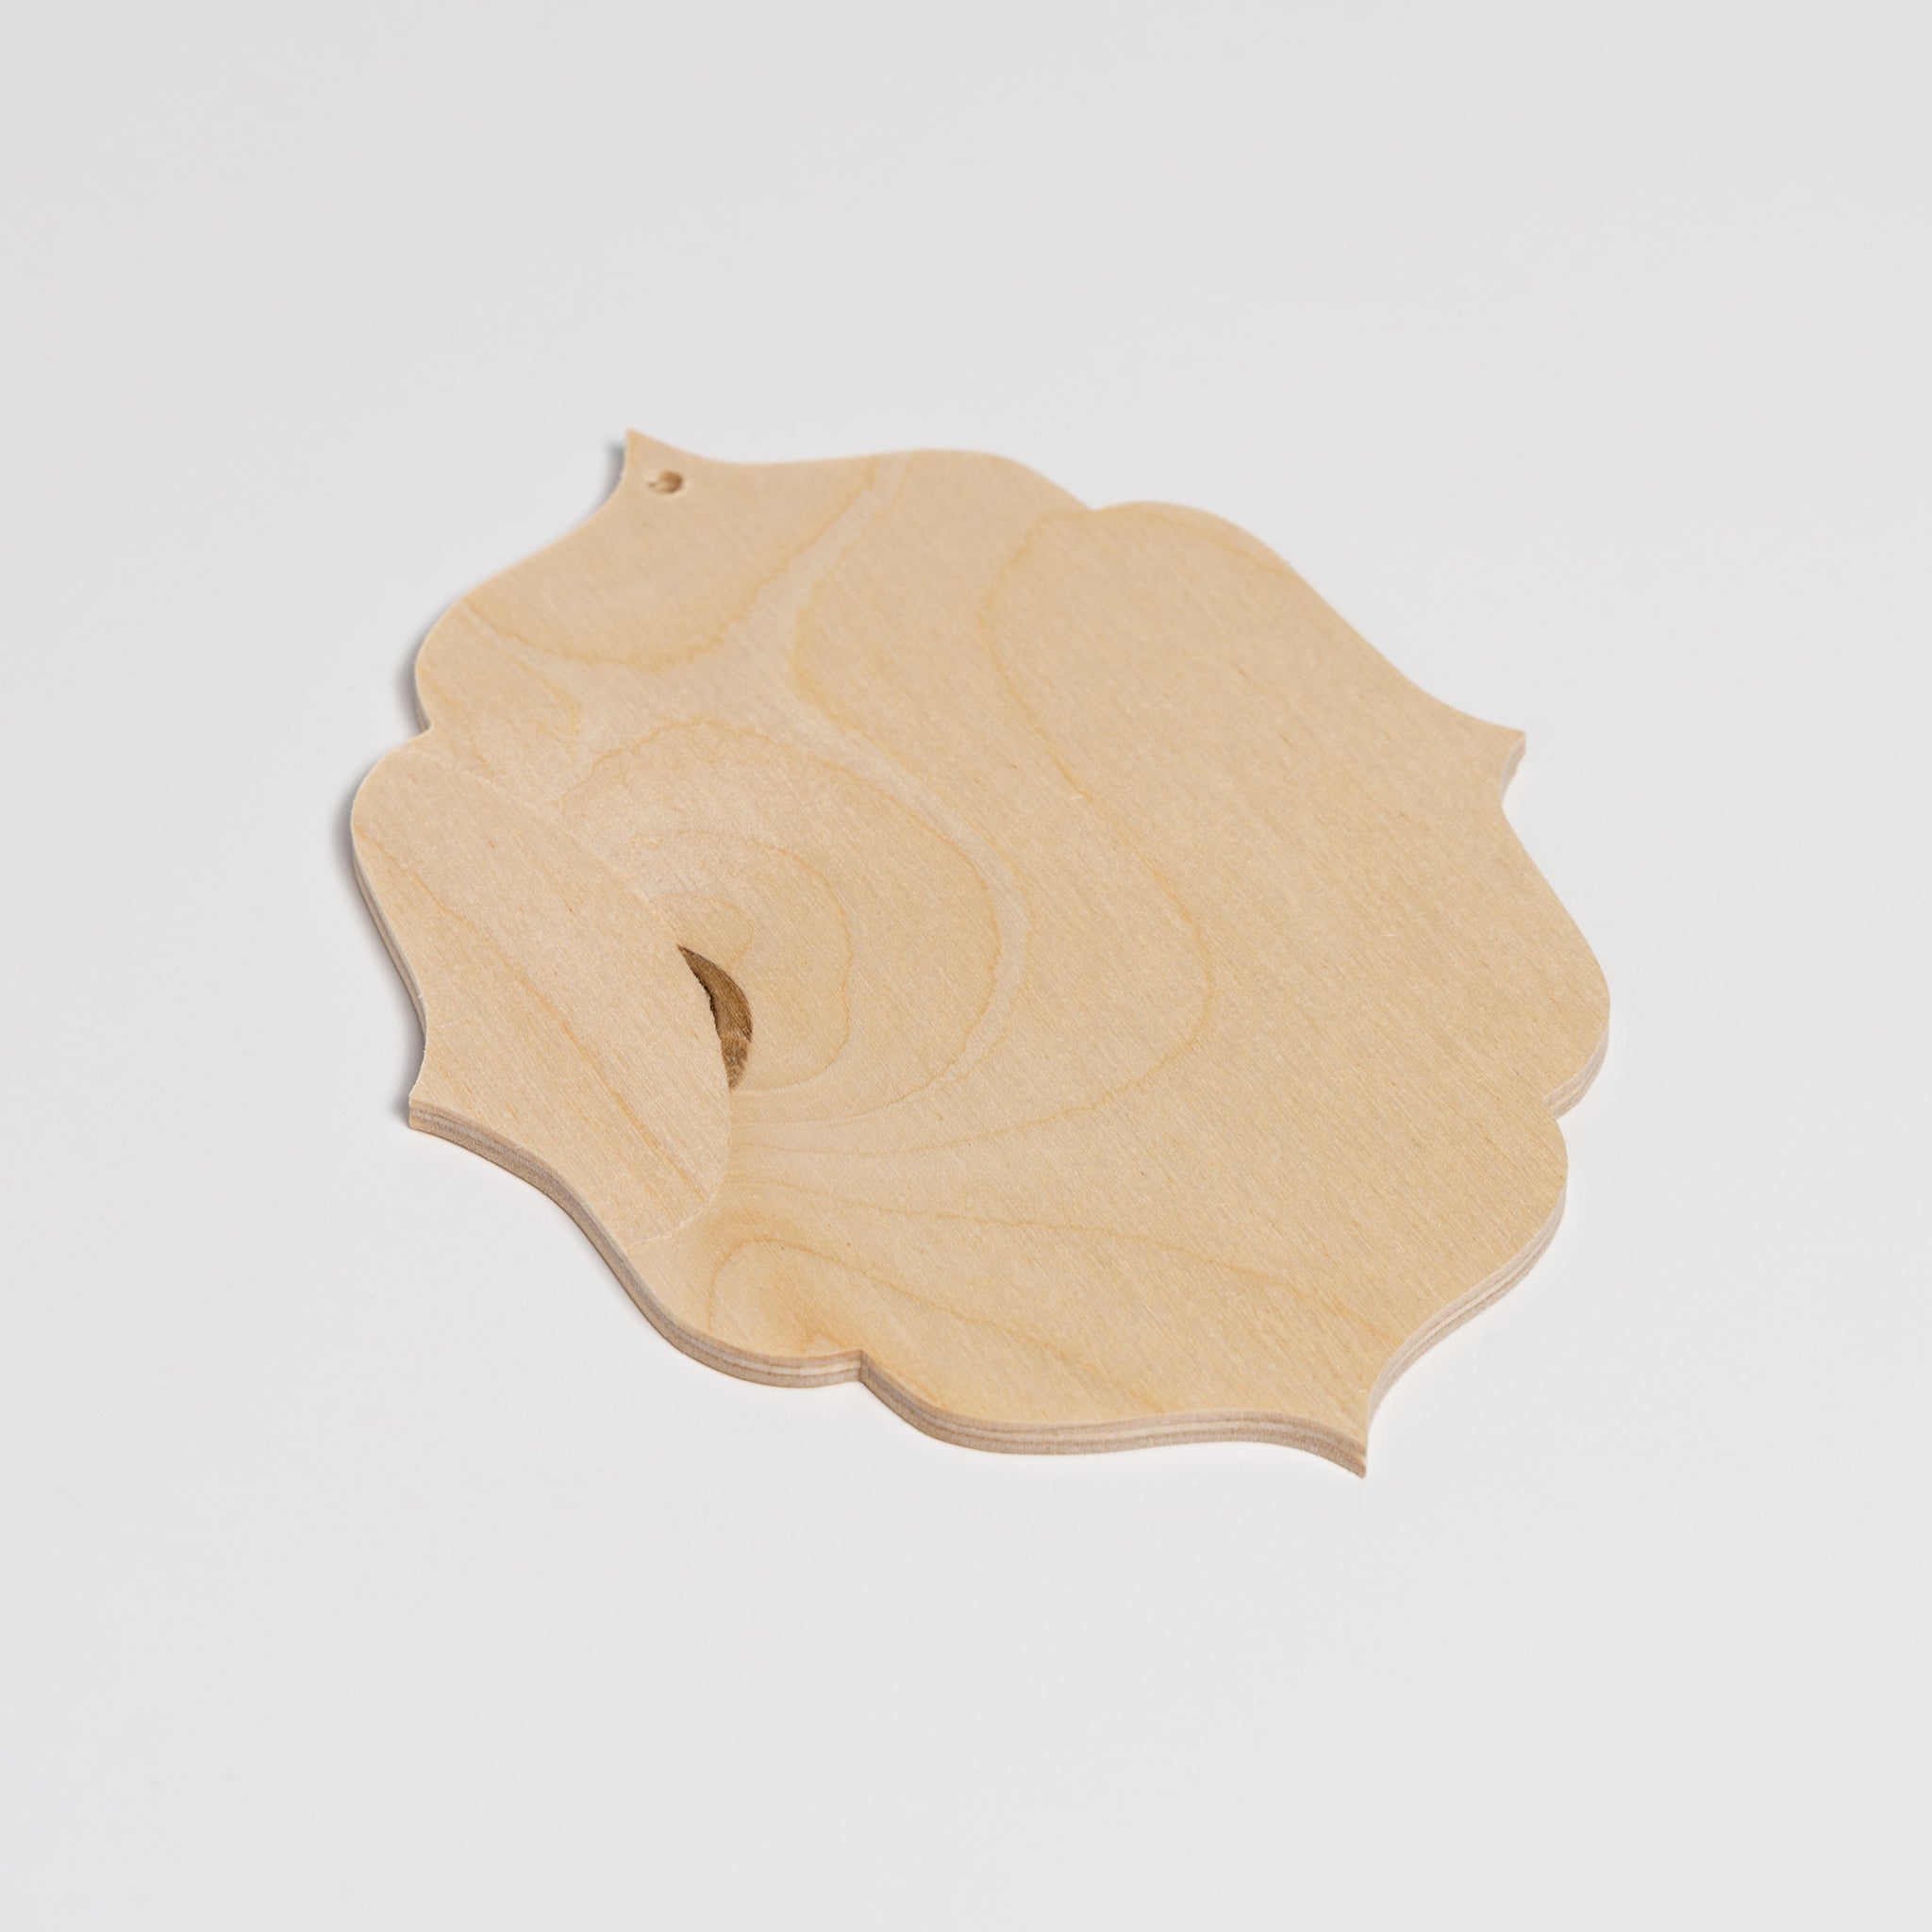 Oval Wooden Ornament with Scalloped Edge